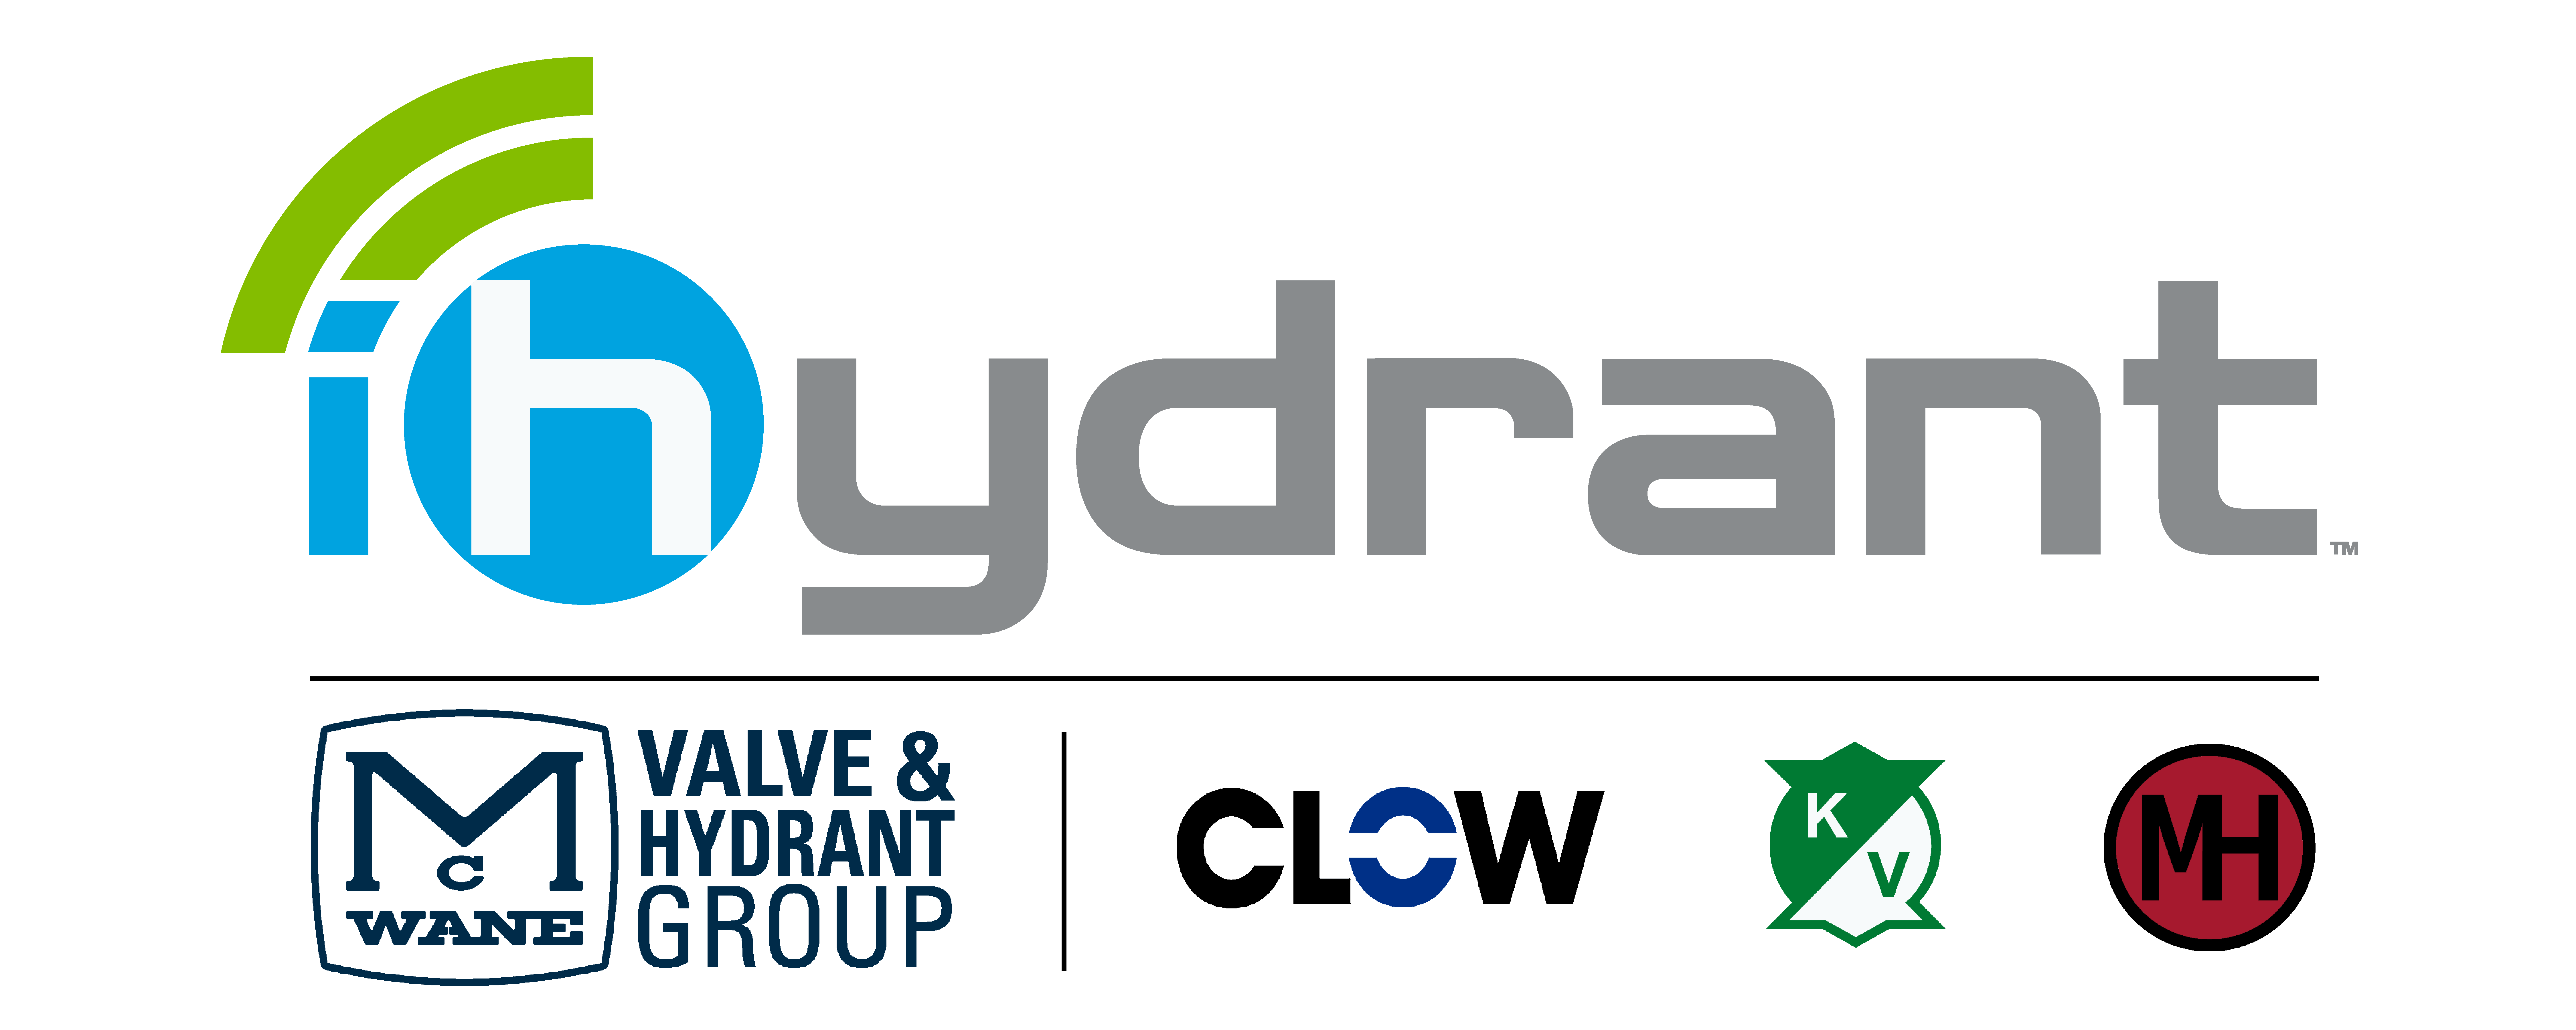 NB COLOR LOGOS iHydrant by VH Group - Clow - KV - MHV